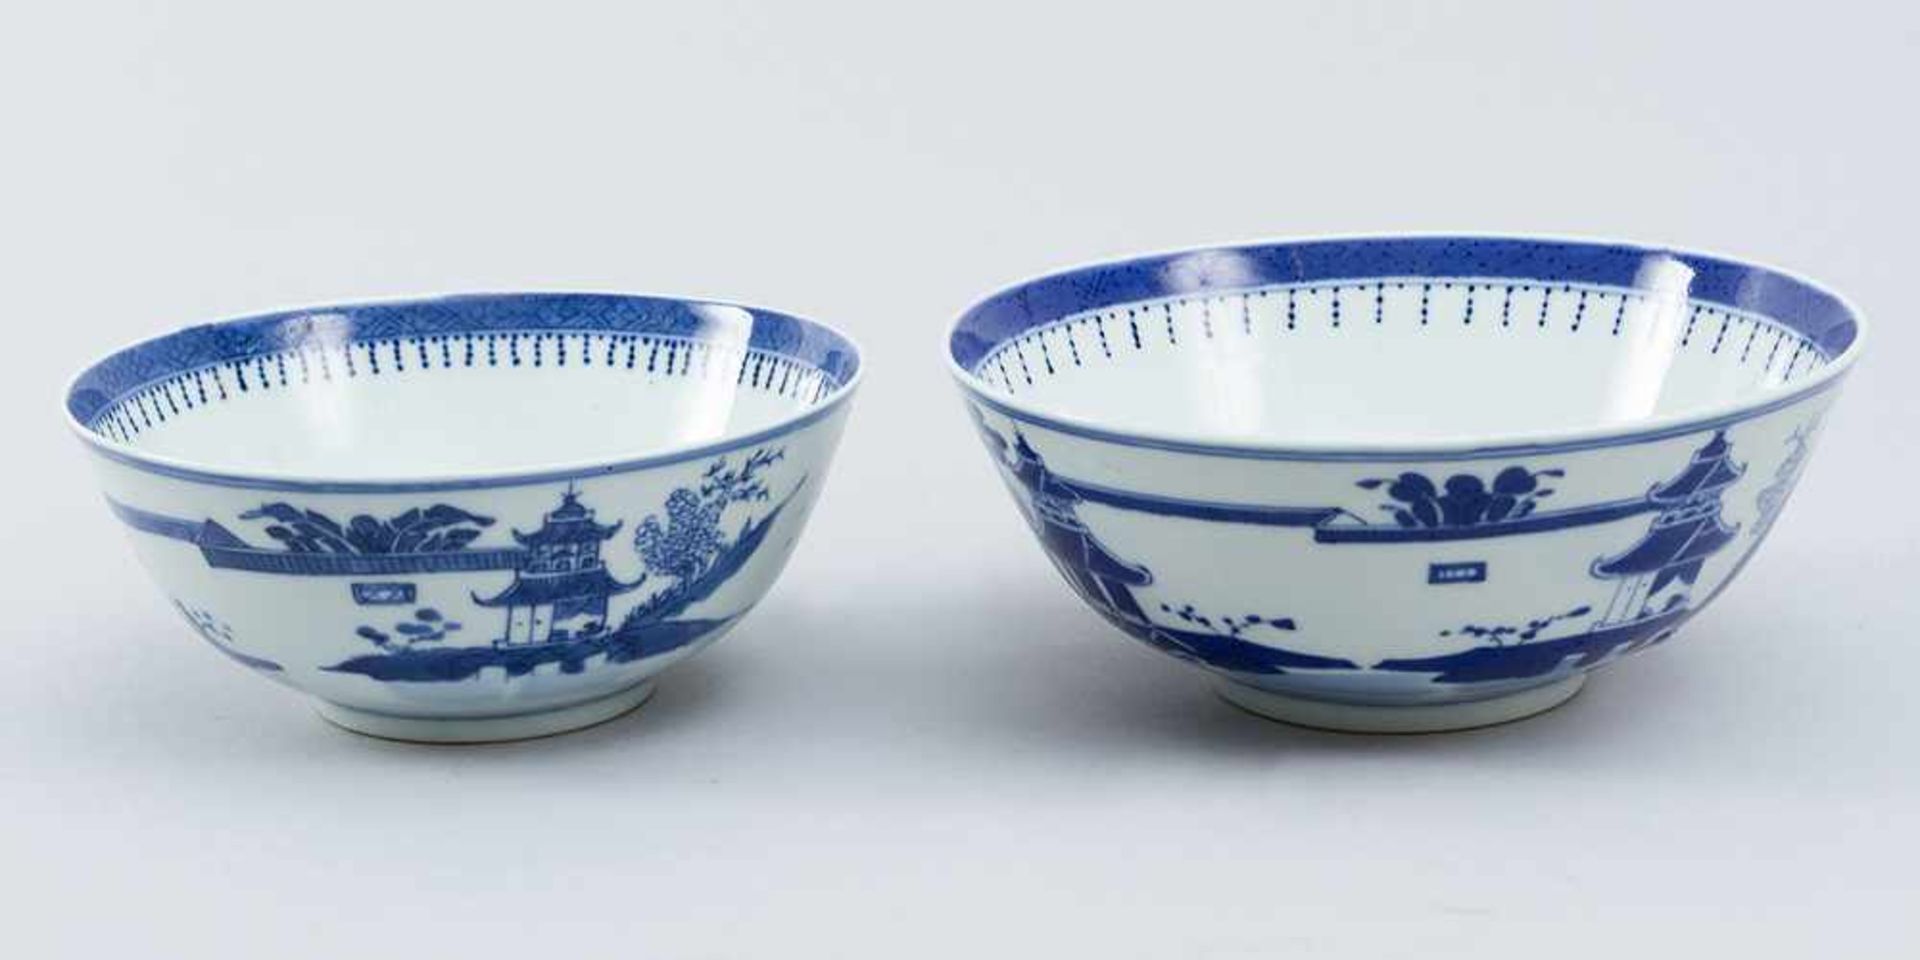 Two blue and white Chinese porcelain bowls